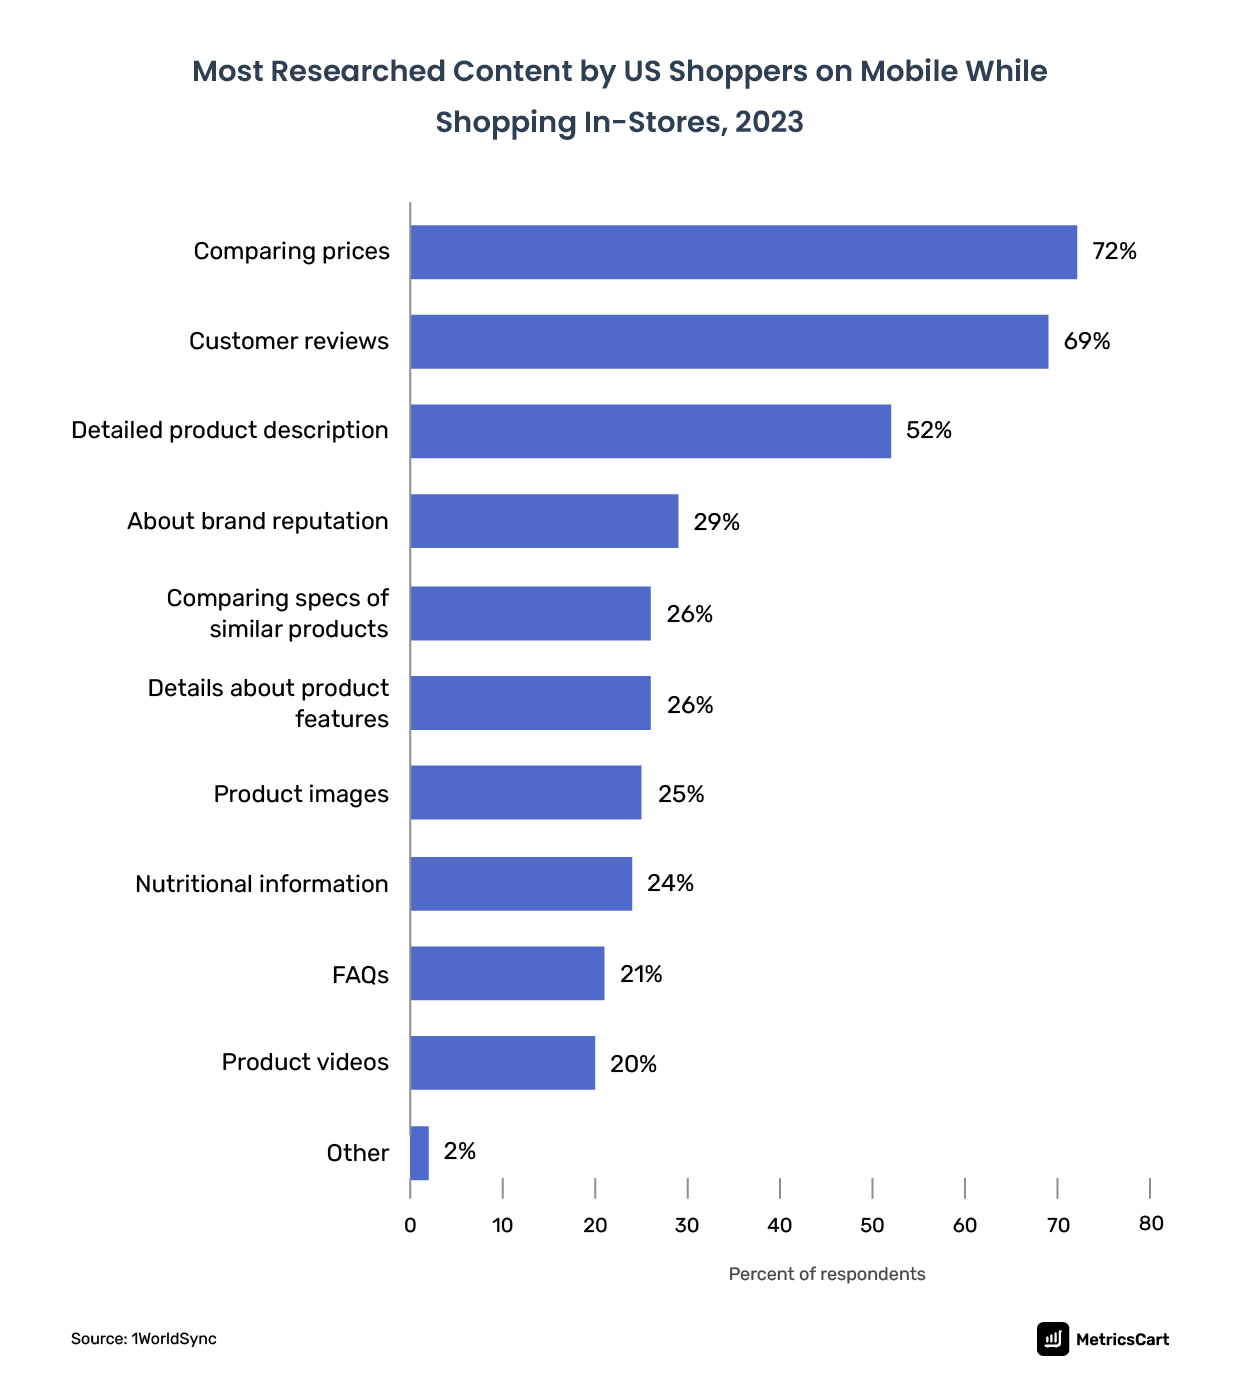 Chart showing Content That Was Most Researched By Shoppers on Smartphones While Shopping In-Stores in 2023